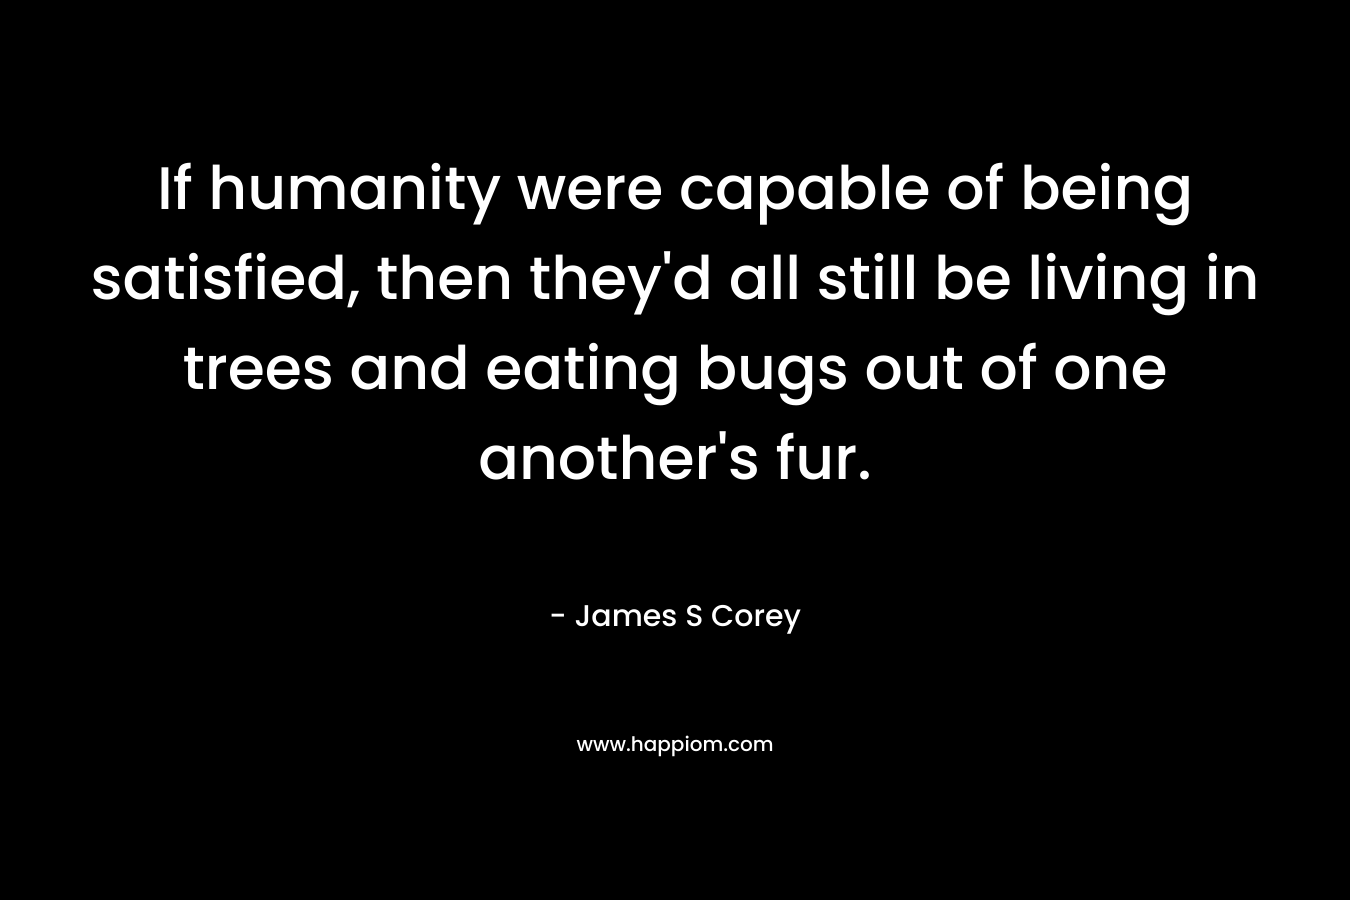 If humanity were capable of being satisfied, then they'd all still be living in trees and eating bugs out of one another's fur.